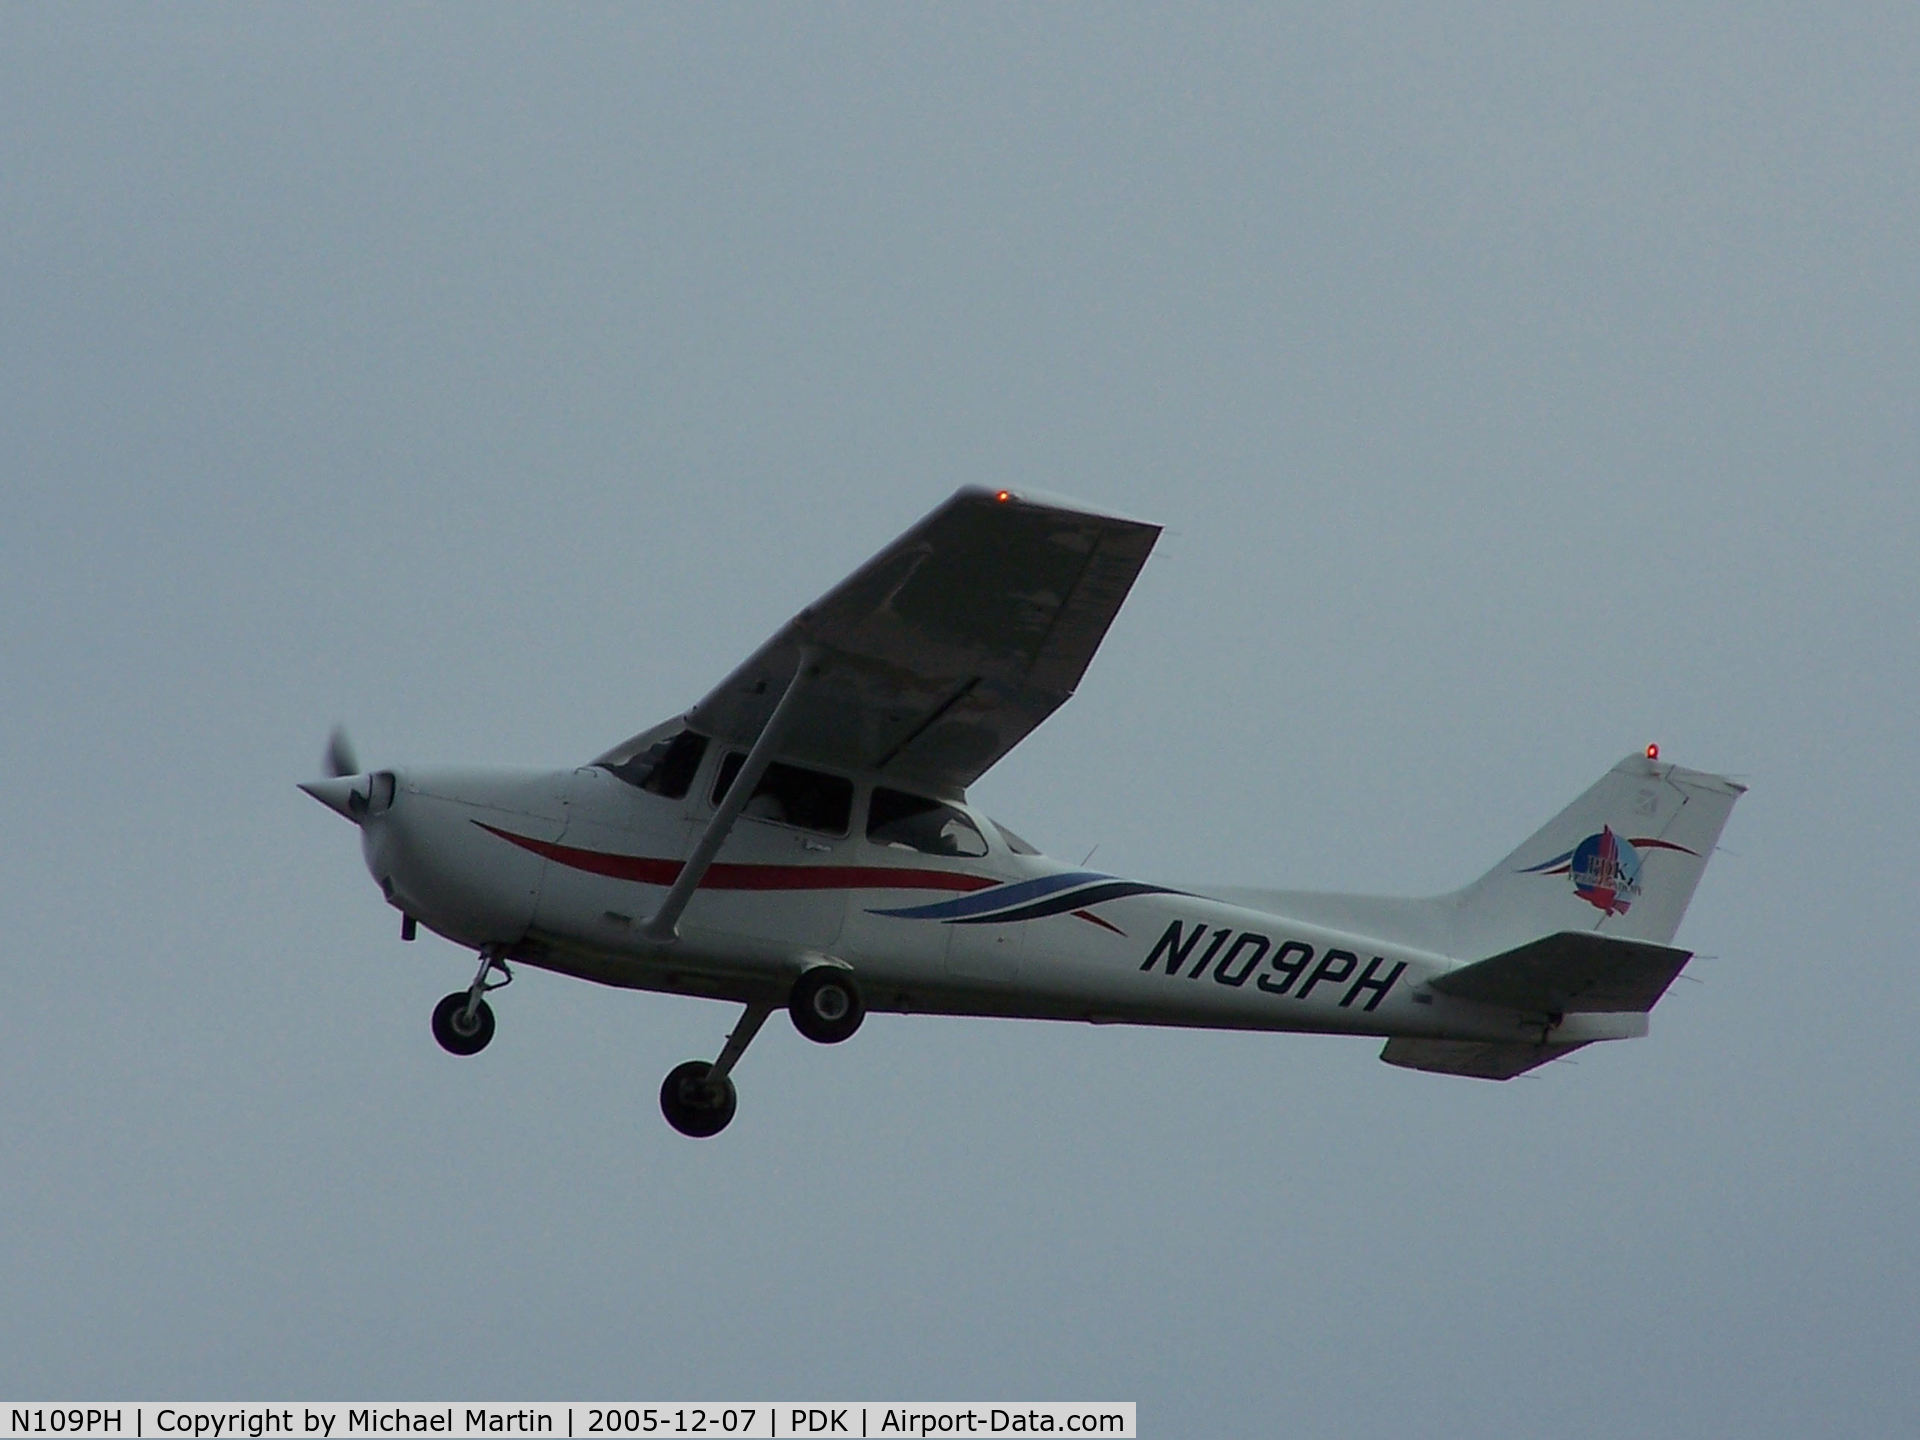 N109PH, 1999 Cessna 172R C/N 17280802, Another student pilot takes to the air!